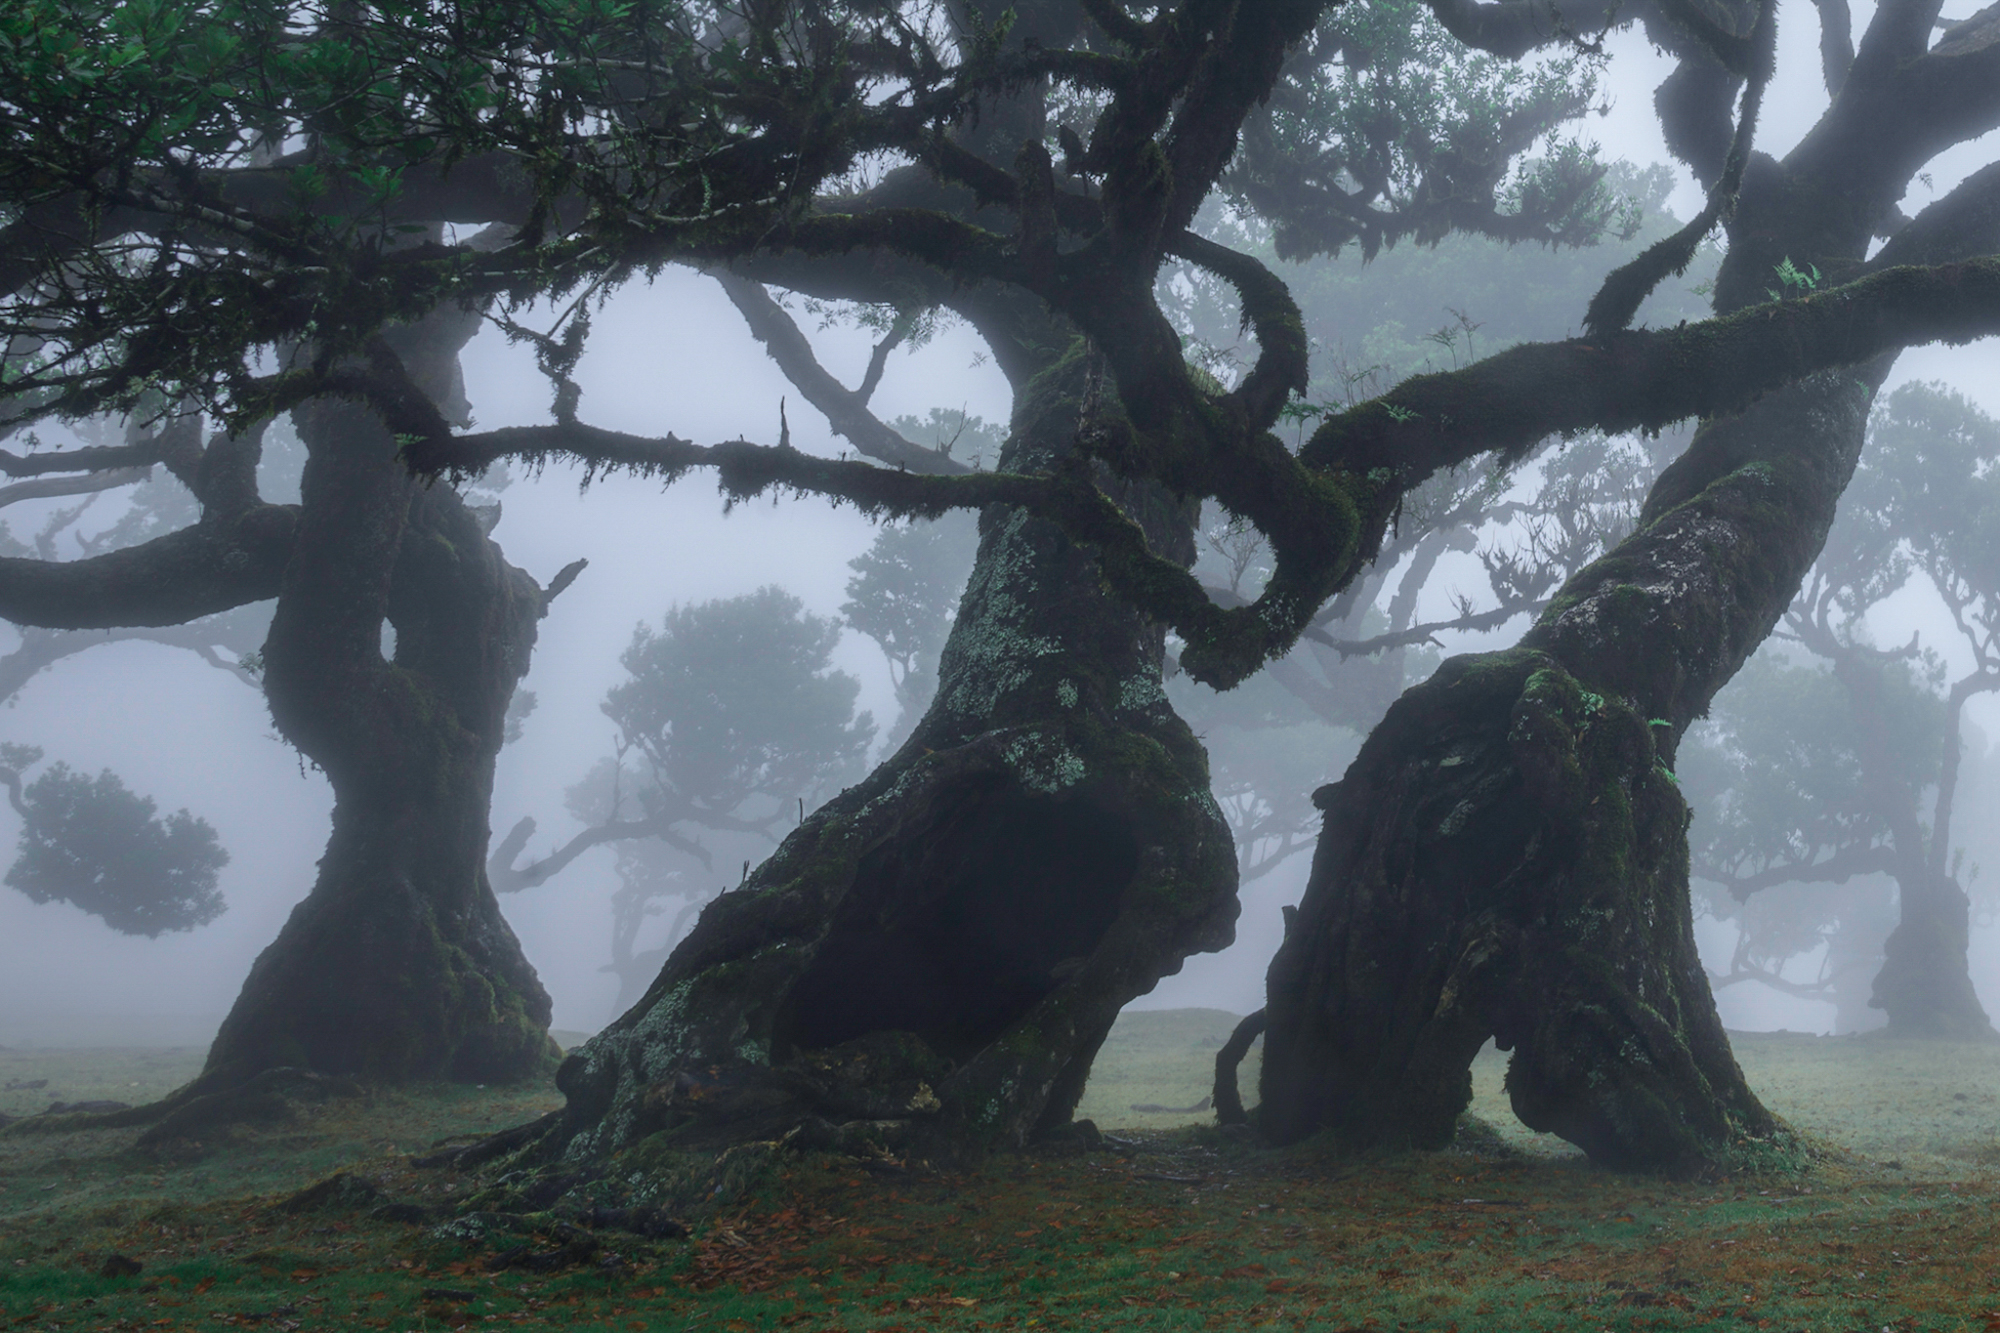 The Dancing Ents...